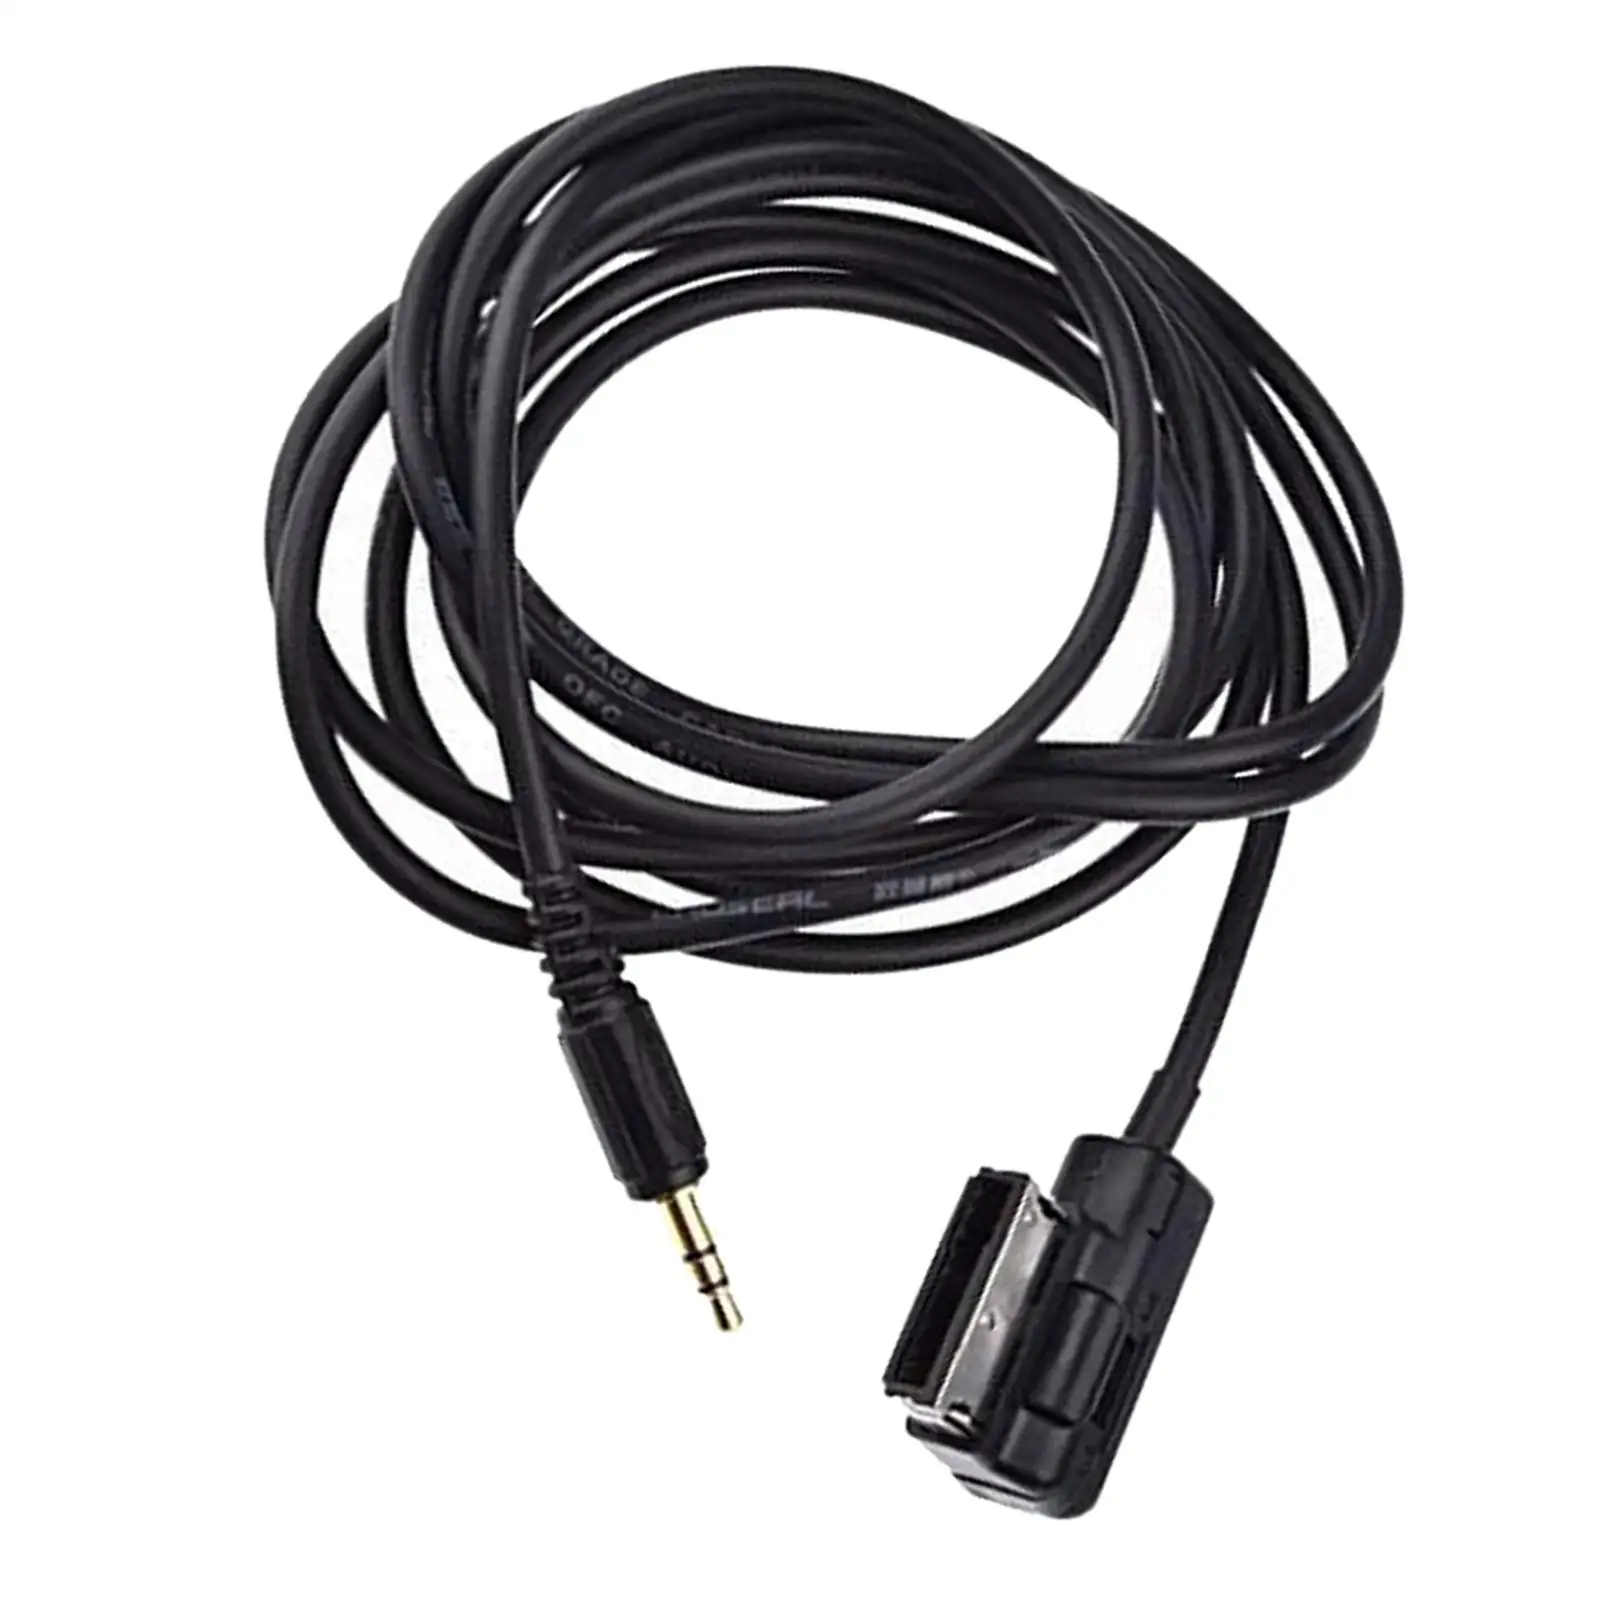 

Car Mdi AMI AUX to 3.5mm Jack Car Audio Adapter Cable Music Interface 2M AUX Cord for Audi Q3 Q5 Q7 R8 TT A6 A7 for VW